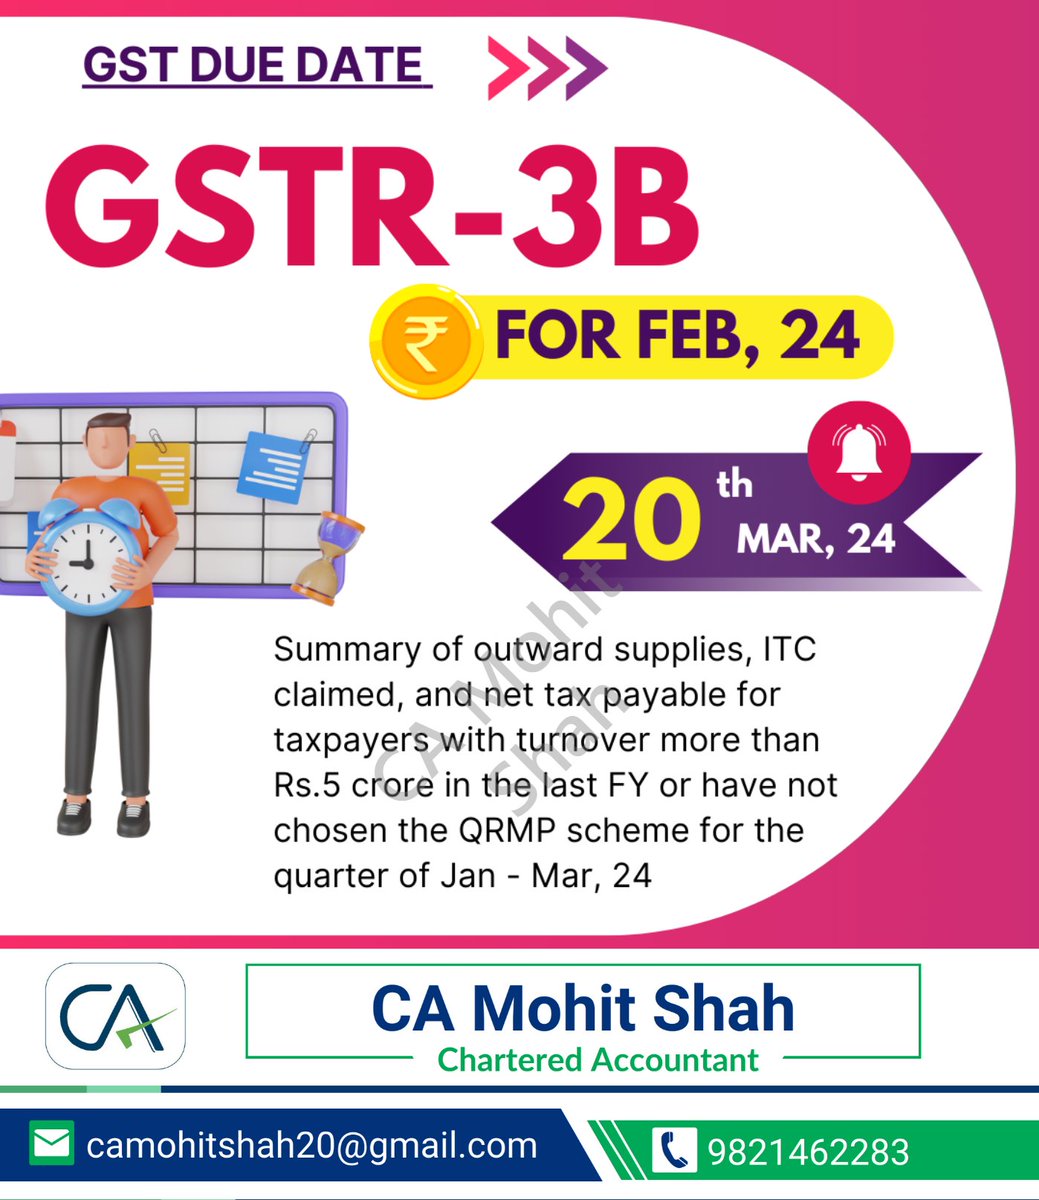 Reminder: Submit your GSTR-3B for Feb, 2024 by 20th March 2024 if your turnover exceeds Rs.5 crore or if you have not chosen the QRMP scheme for the current quarter.

#GSTR3B #GSTFiling #GSTReturns #TaxCompliance #GSTIndia #DigitalTaxation #BusinessInIndia #IndirectTax #TaxReform